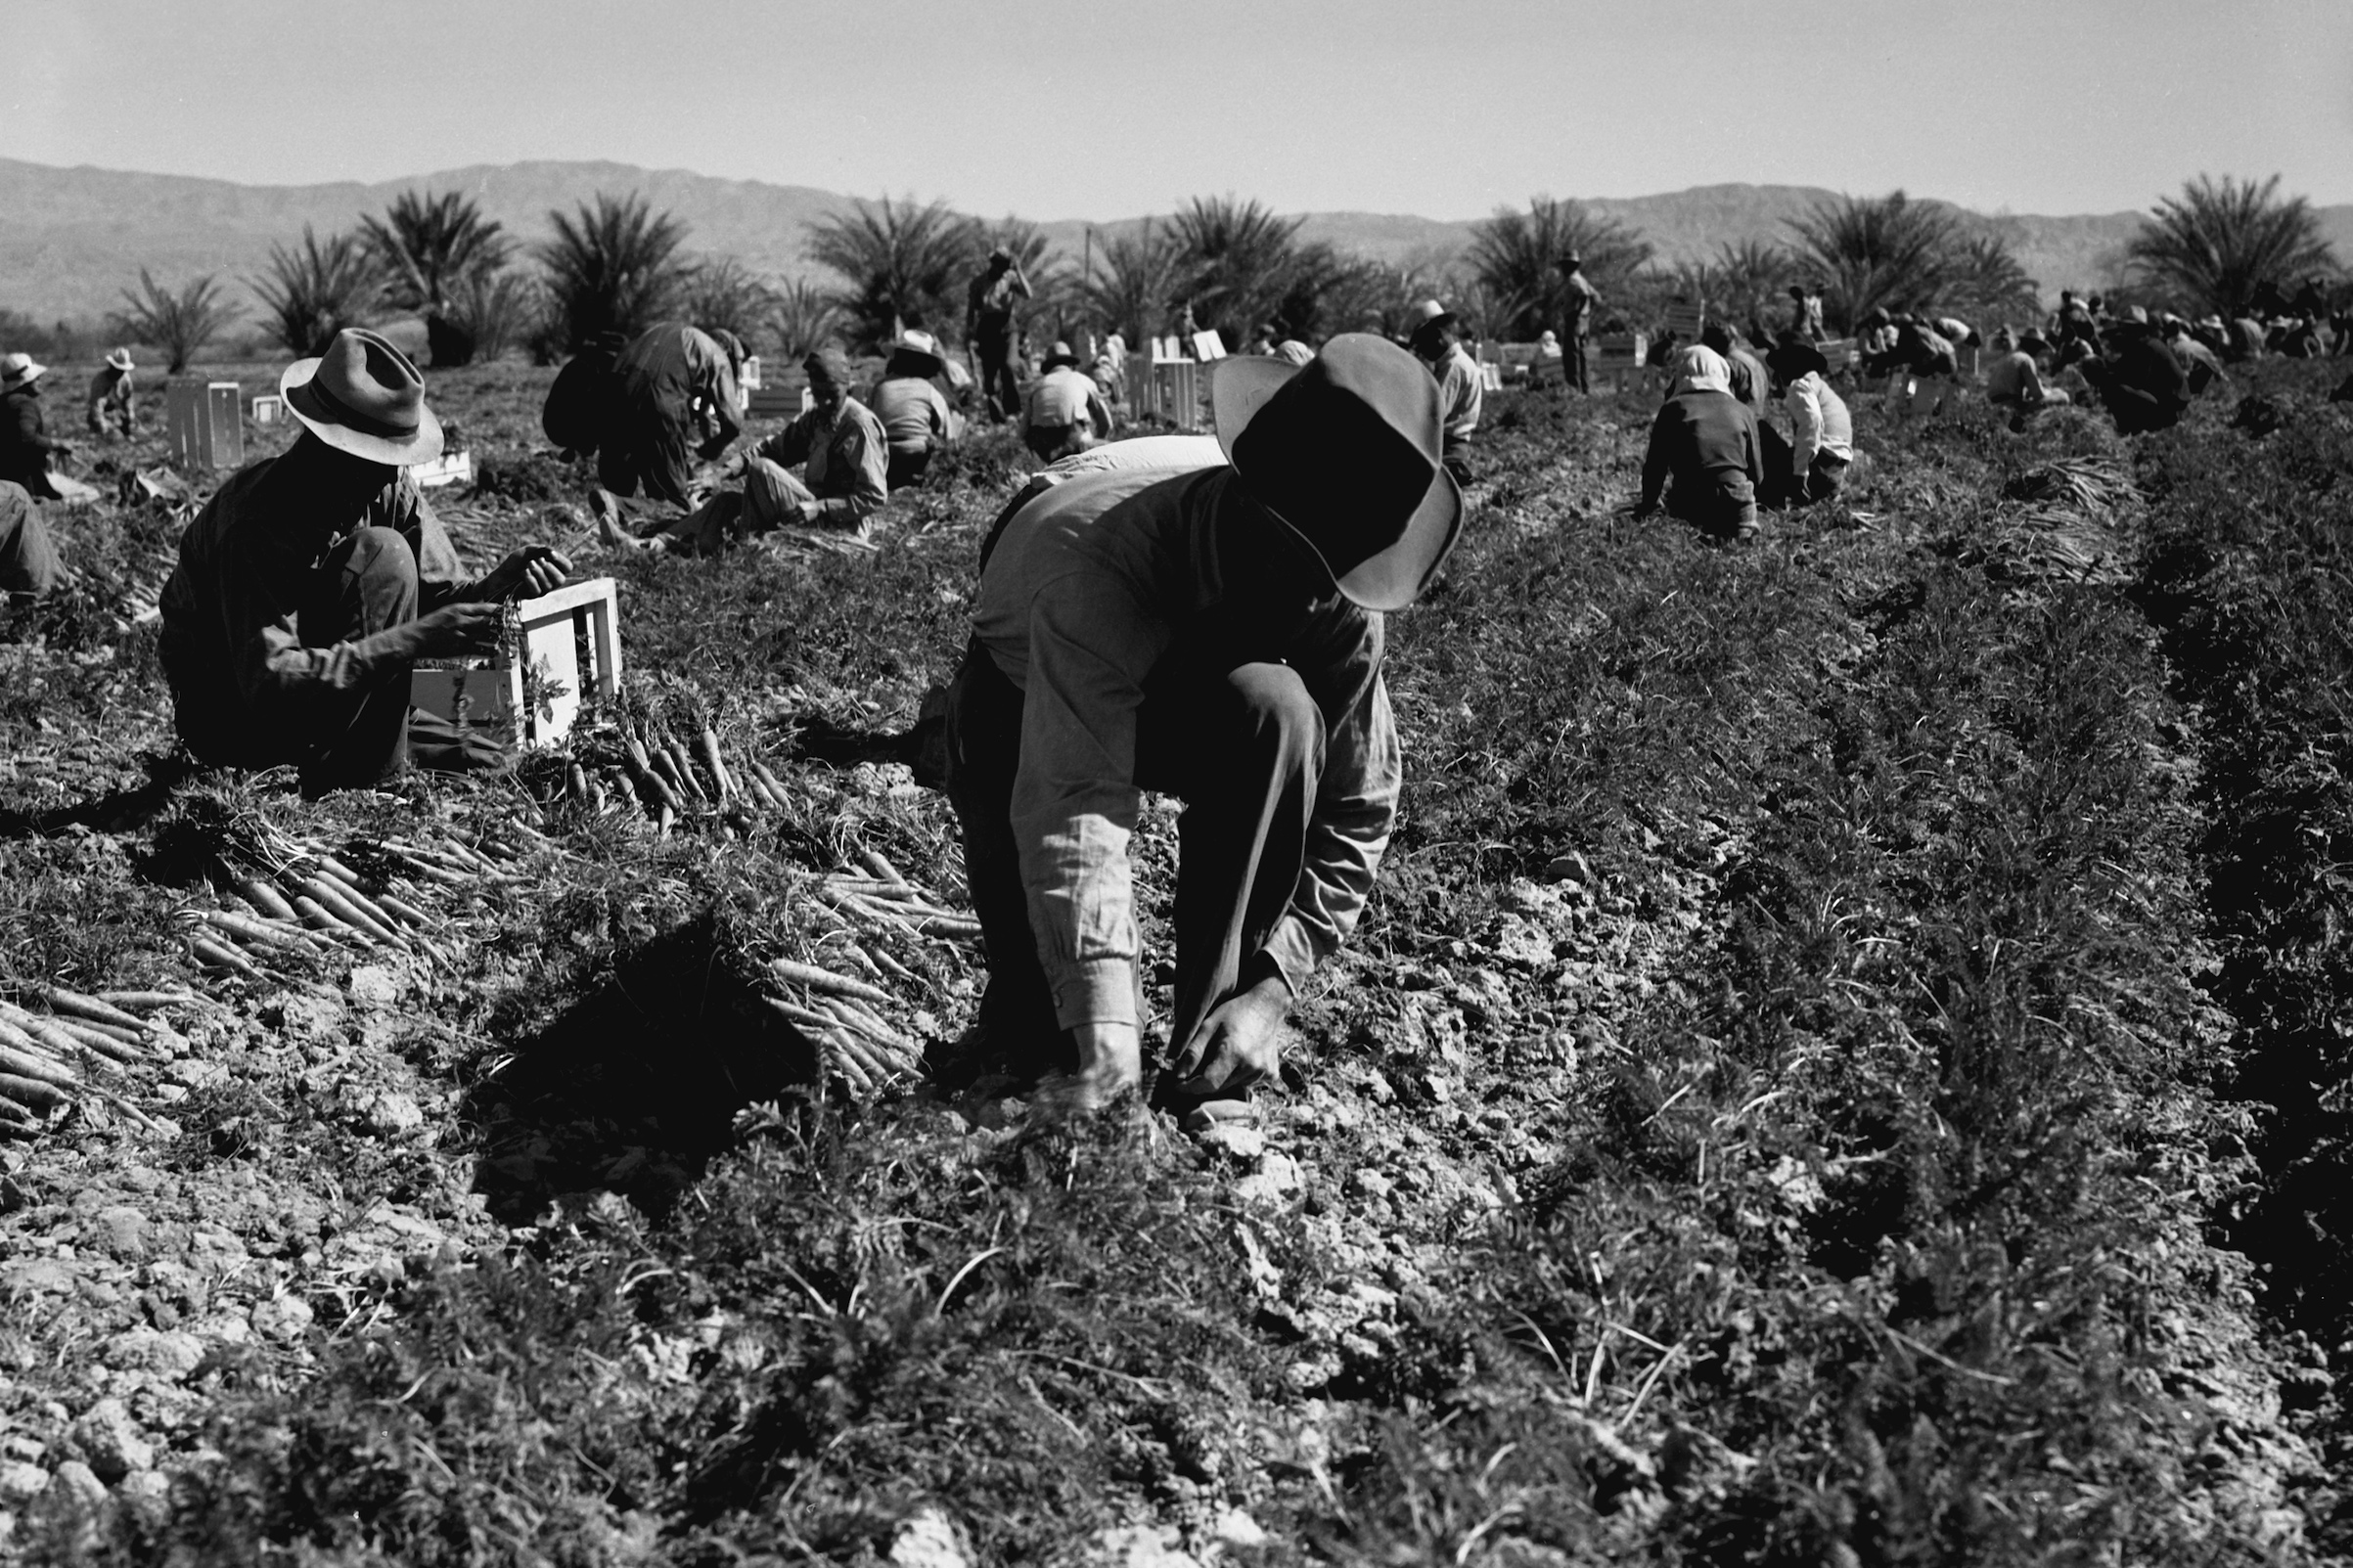 Carrot pullers from Texas, Oklahoma, Missouri, Arkansas and Mexico, at work in California in 1937 (Getty Images)